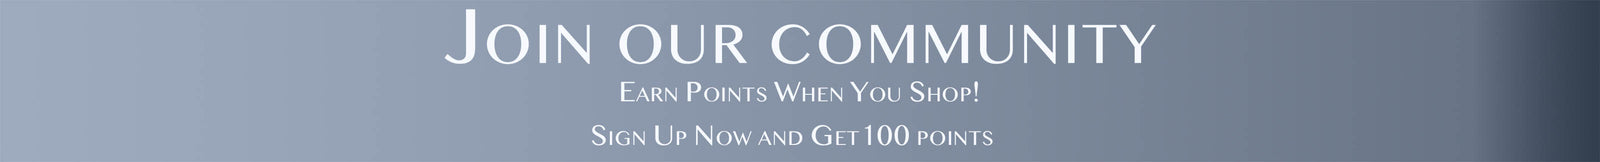 Join our Community and earn points when you shop! Sign Up Now!